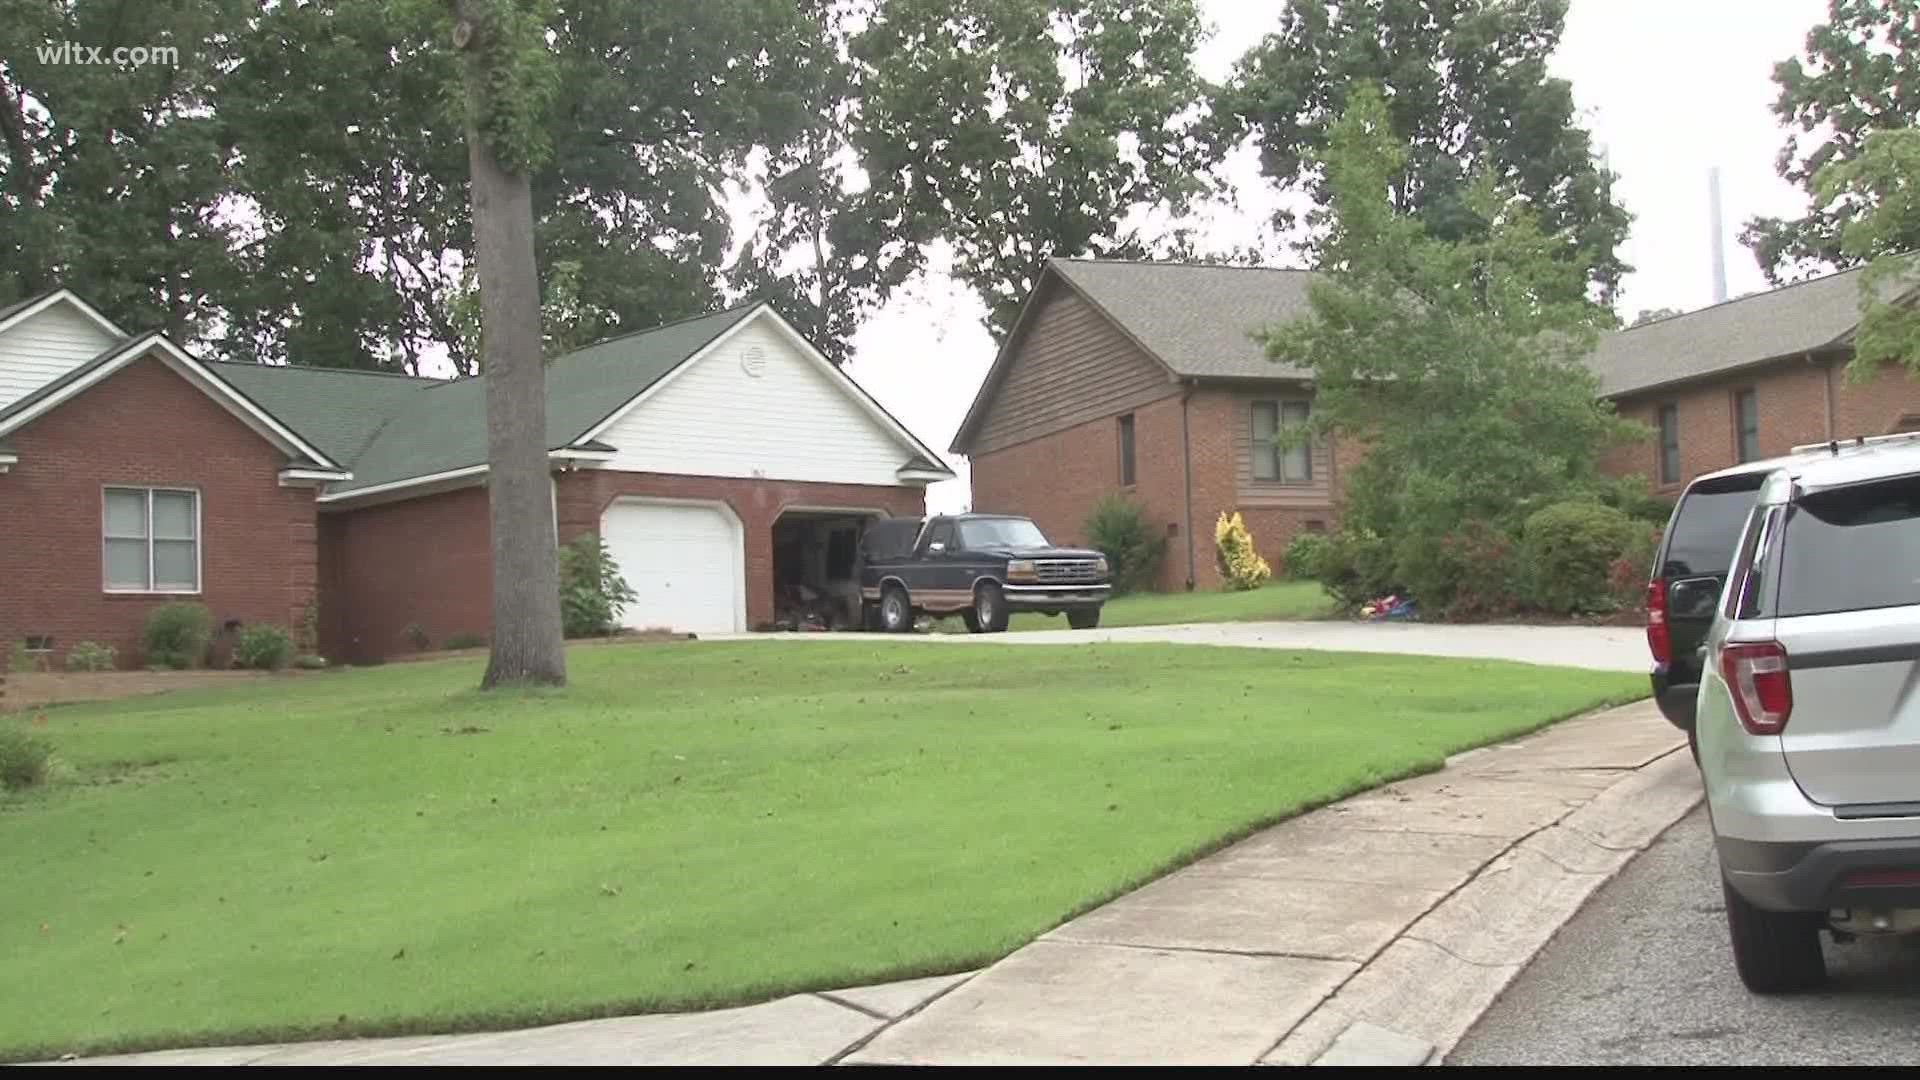 The fatal shooting happened during a home invasion at Lexington's Mallard Lakes.